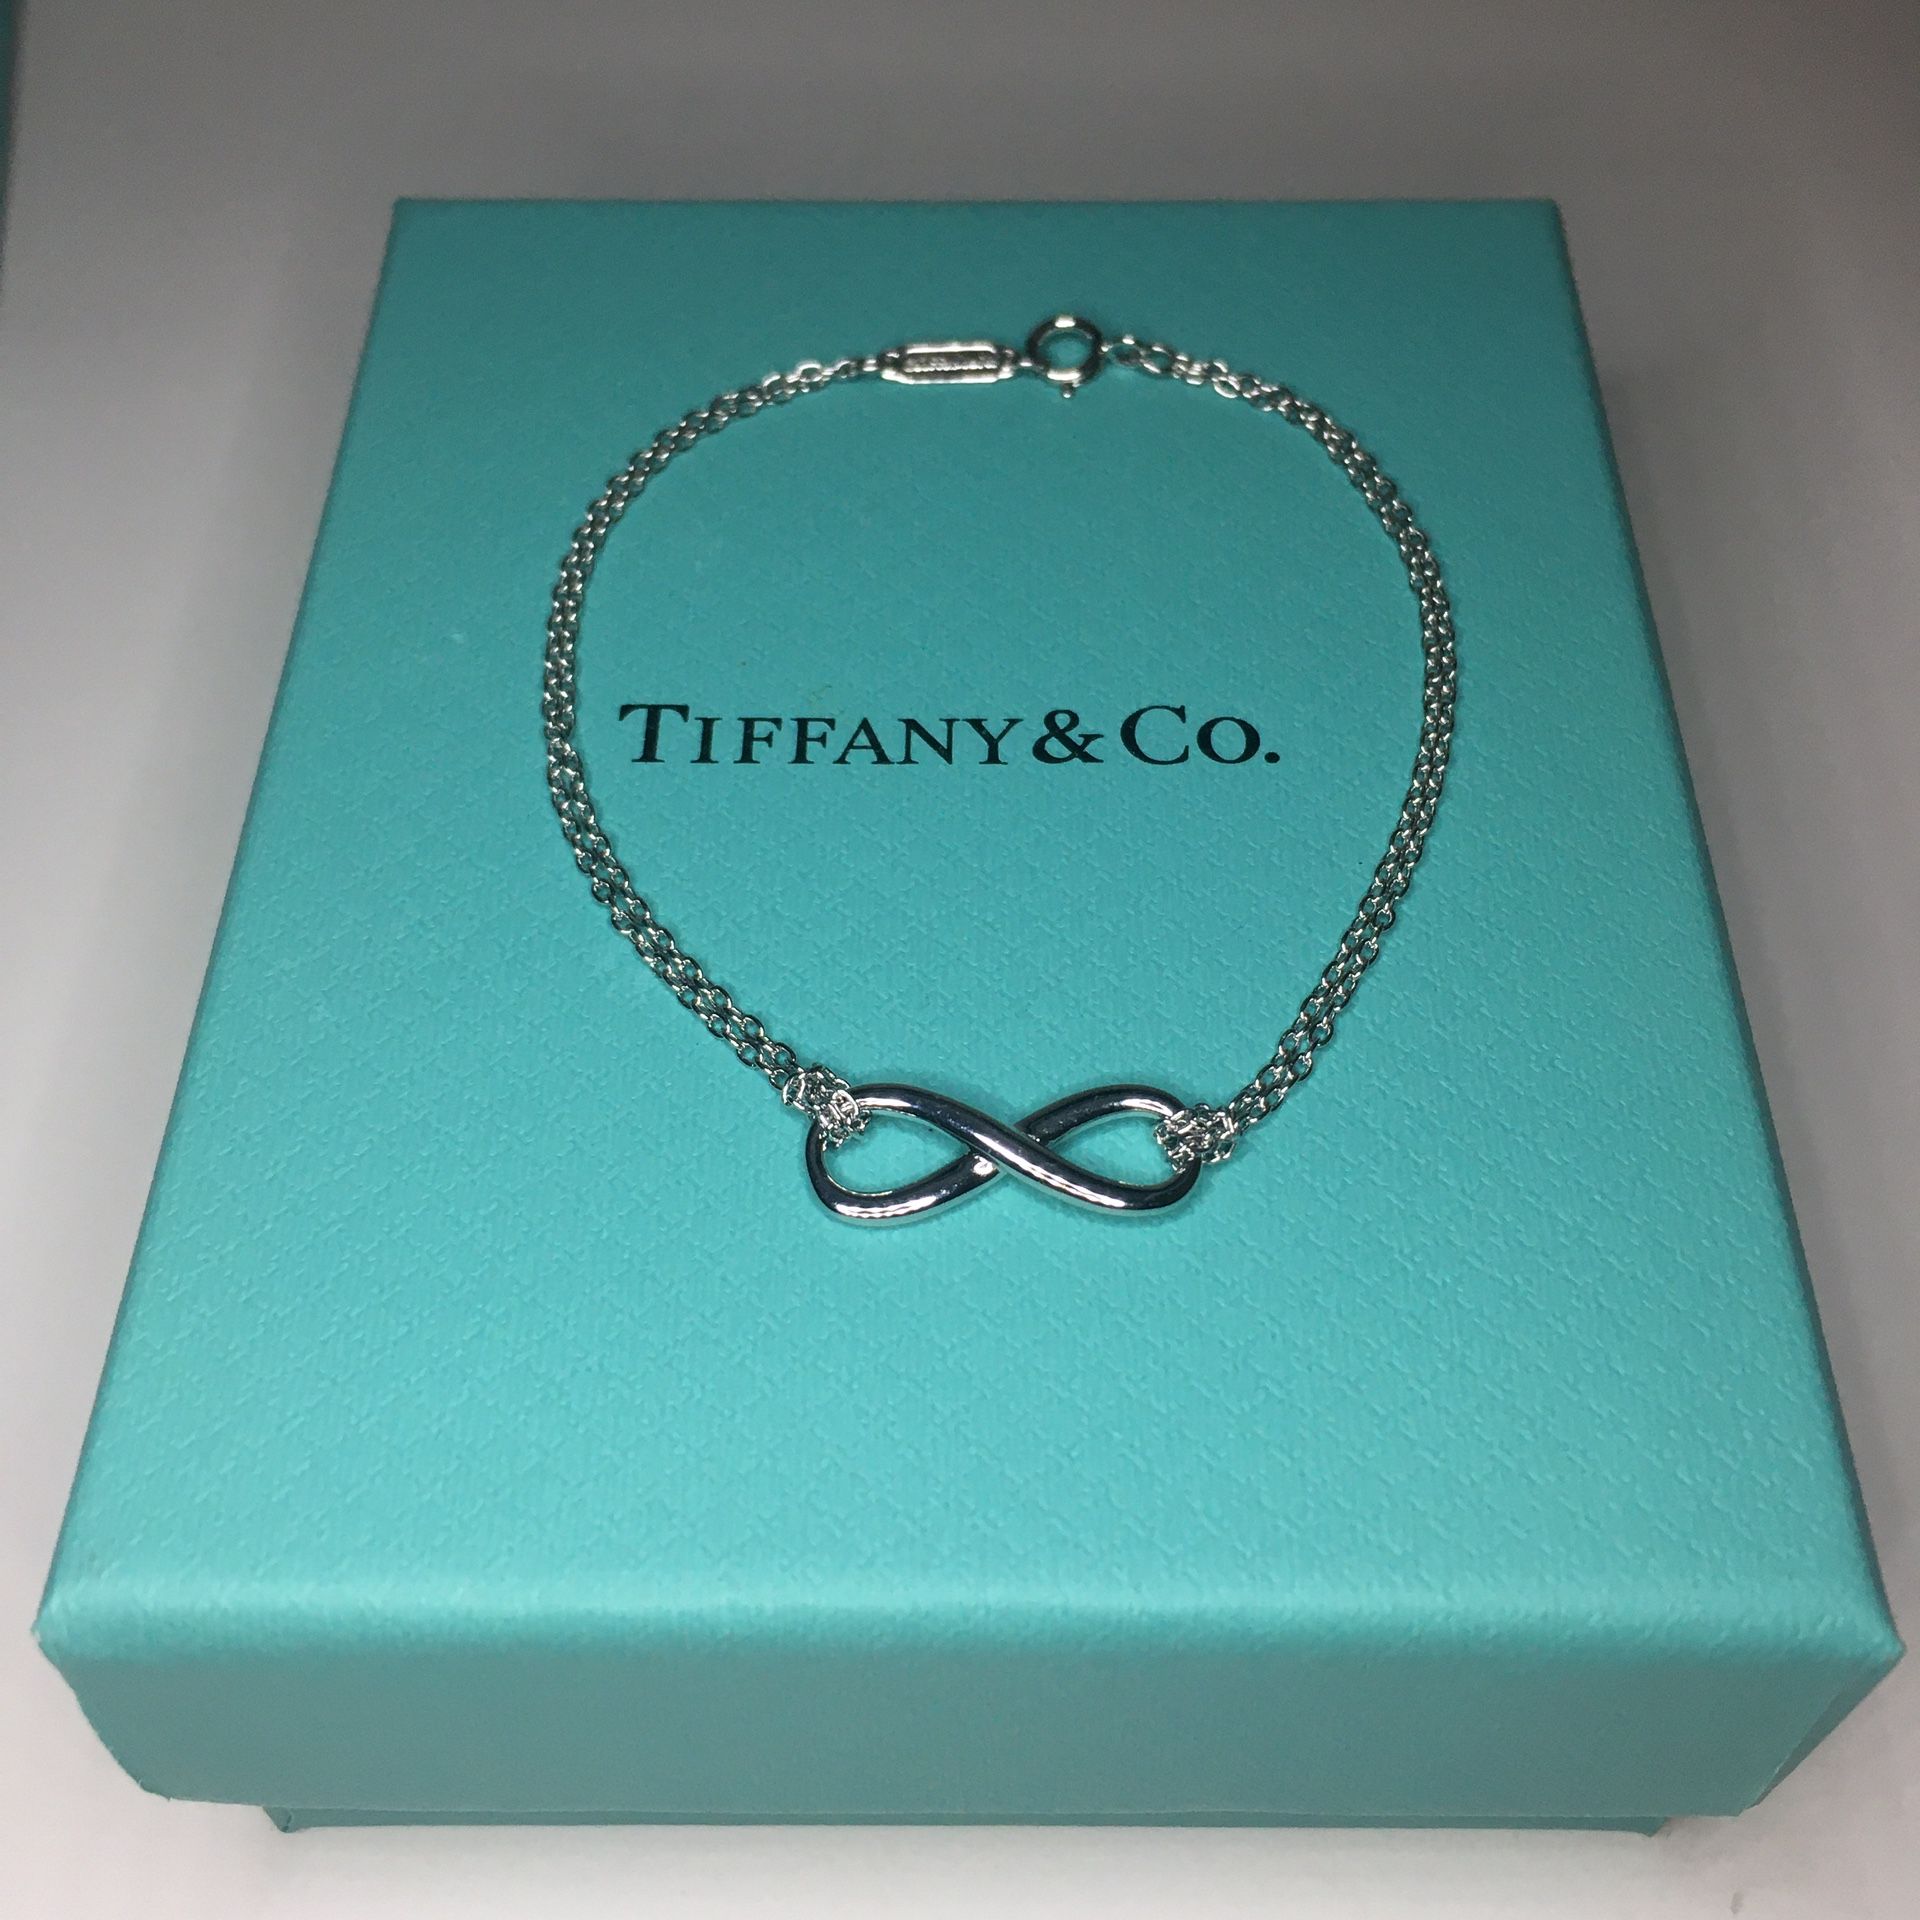 Tiffany & Co. Silver Infinity Bracelet size M 6.75 inches long